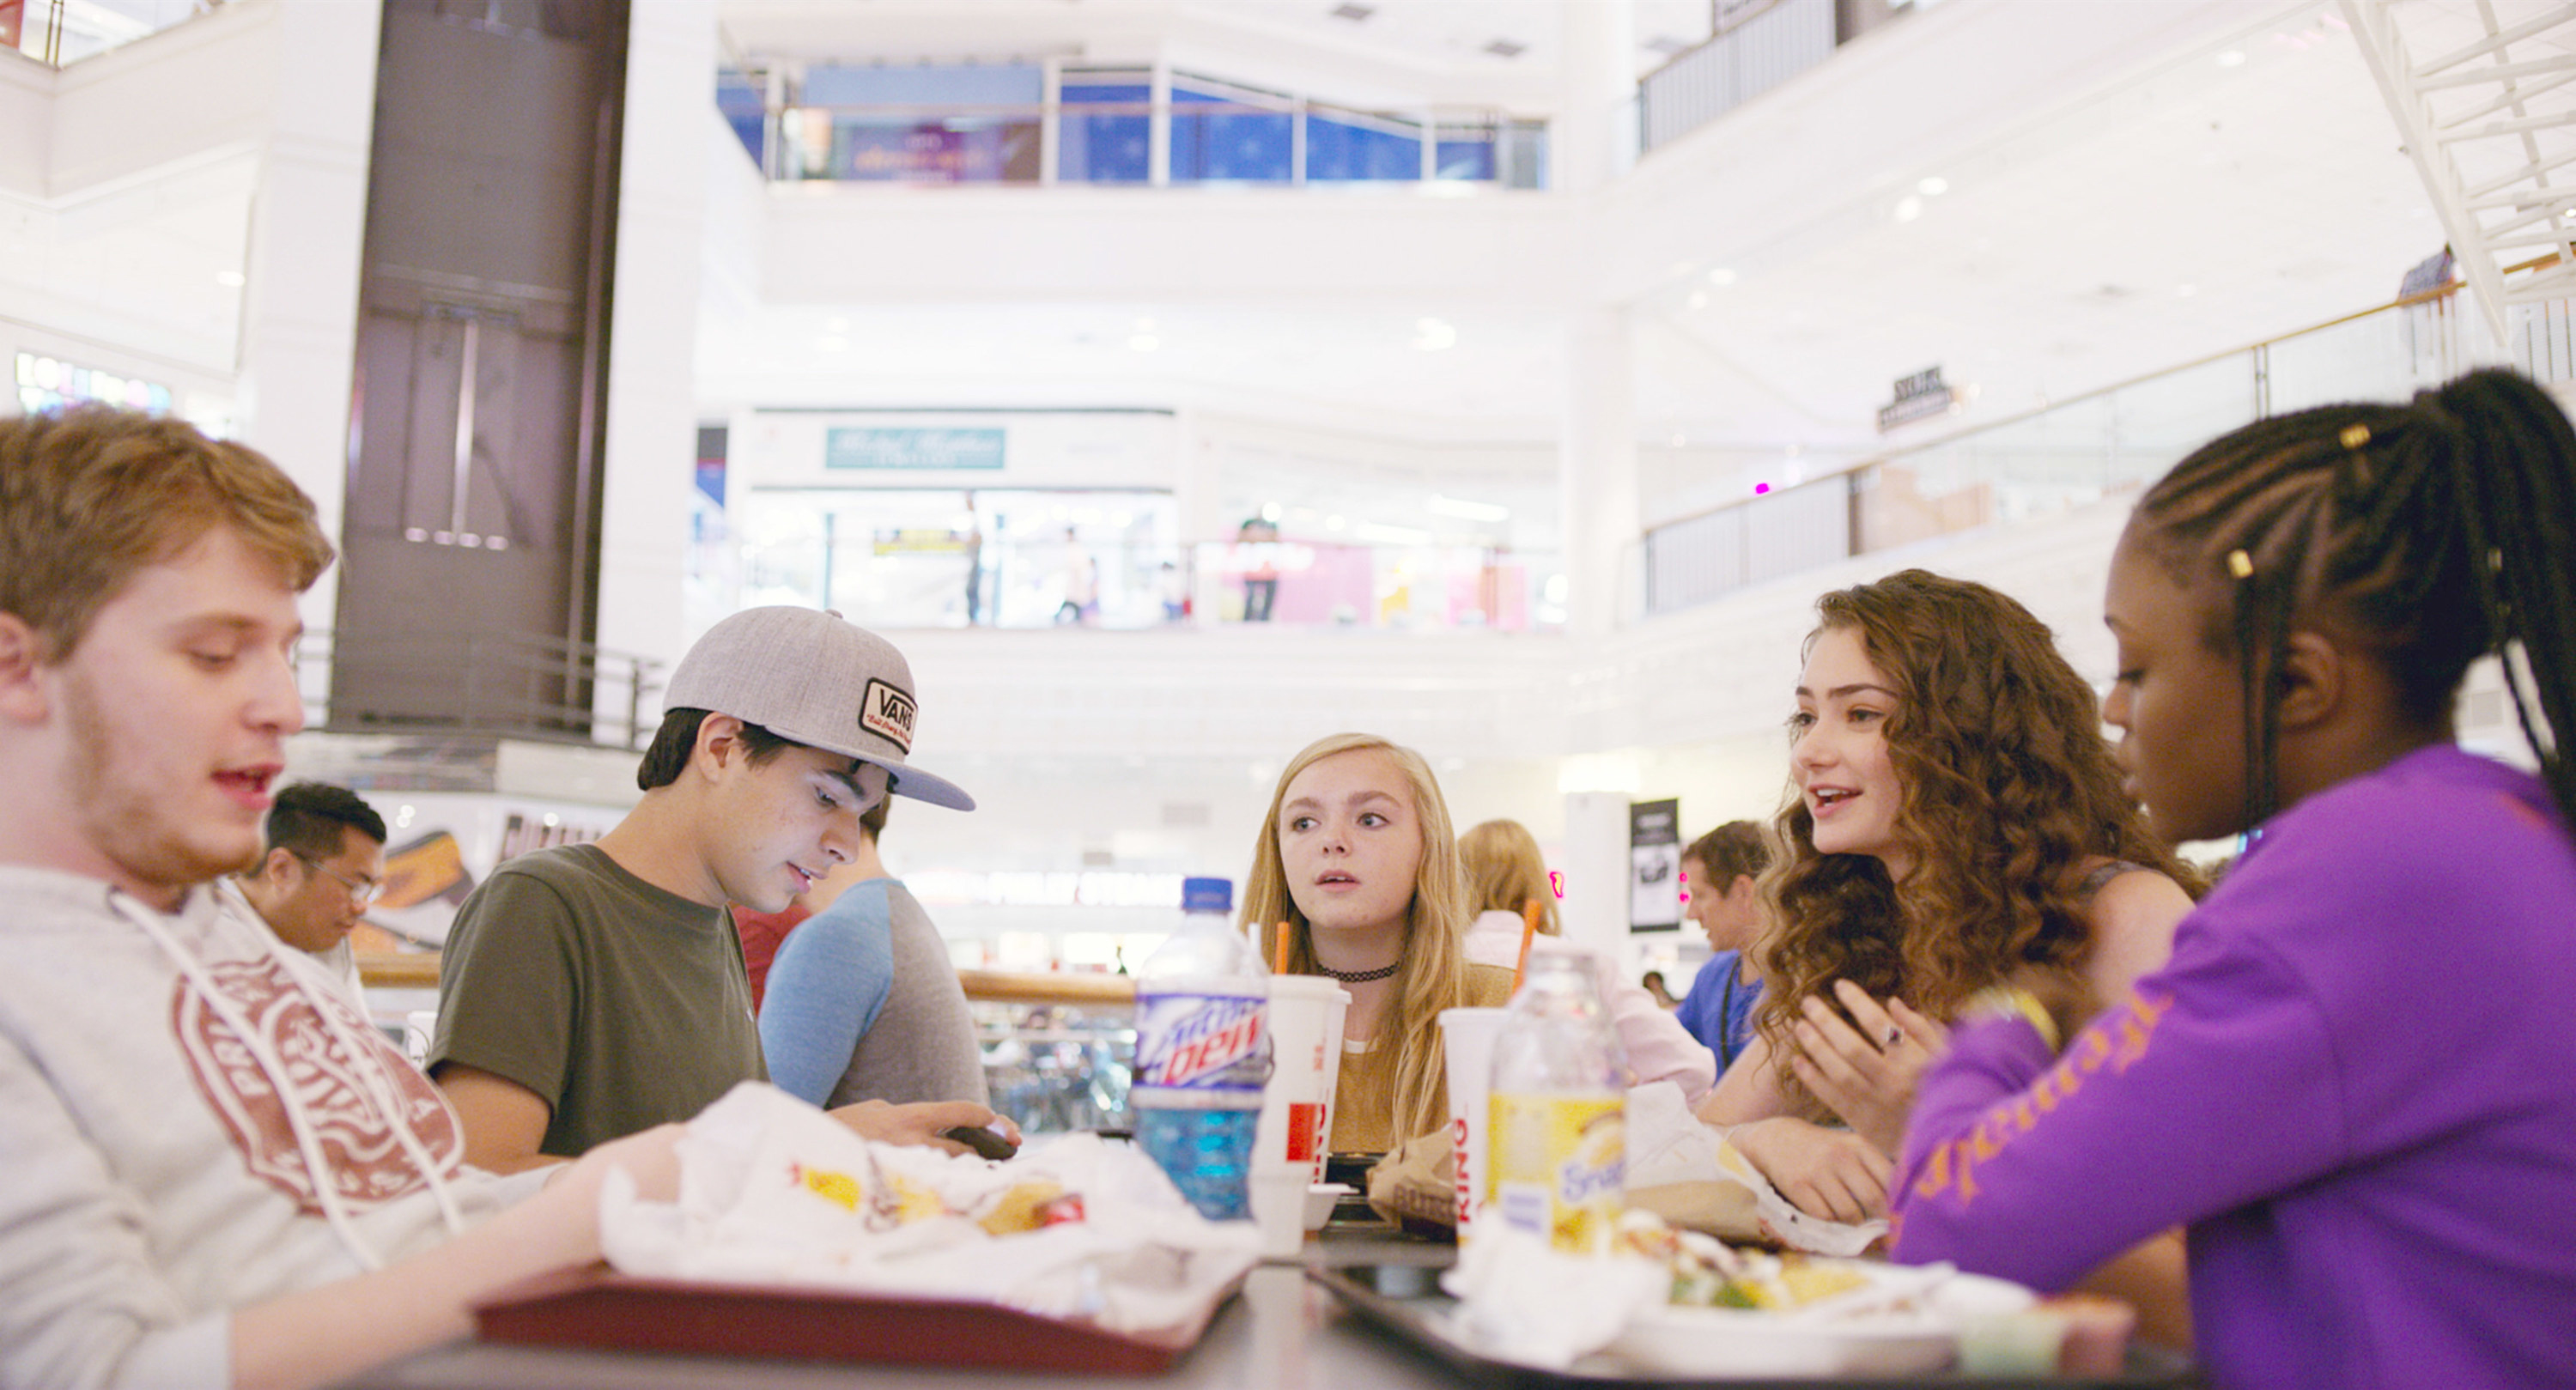 Elsie Fisher sits at a food court table with Fred Hechinger, Daniel Zolghadri, Emily Robinson, and Imani Lewis